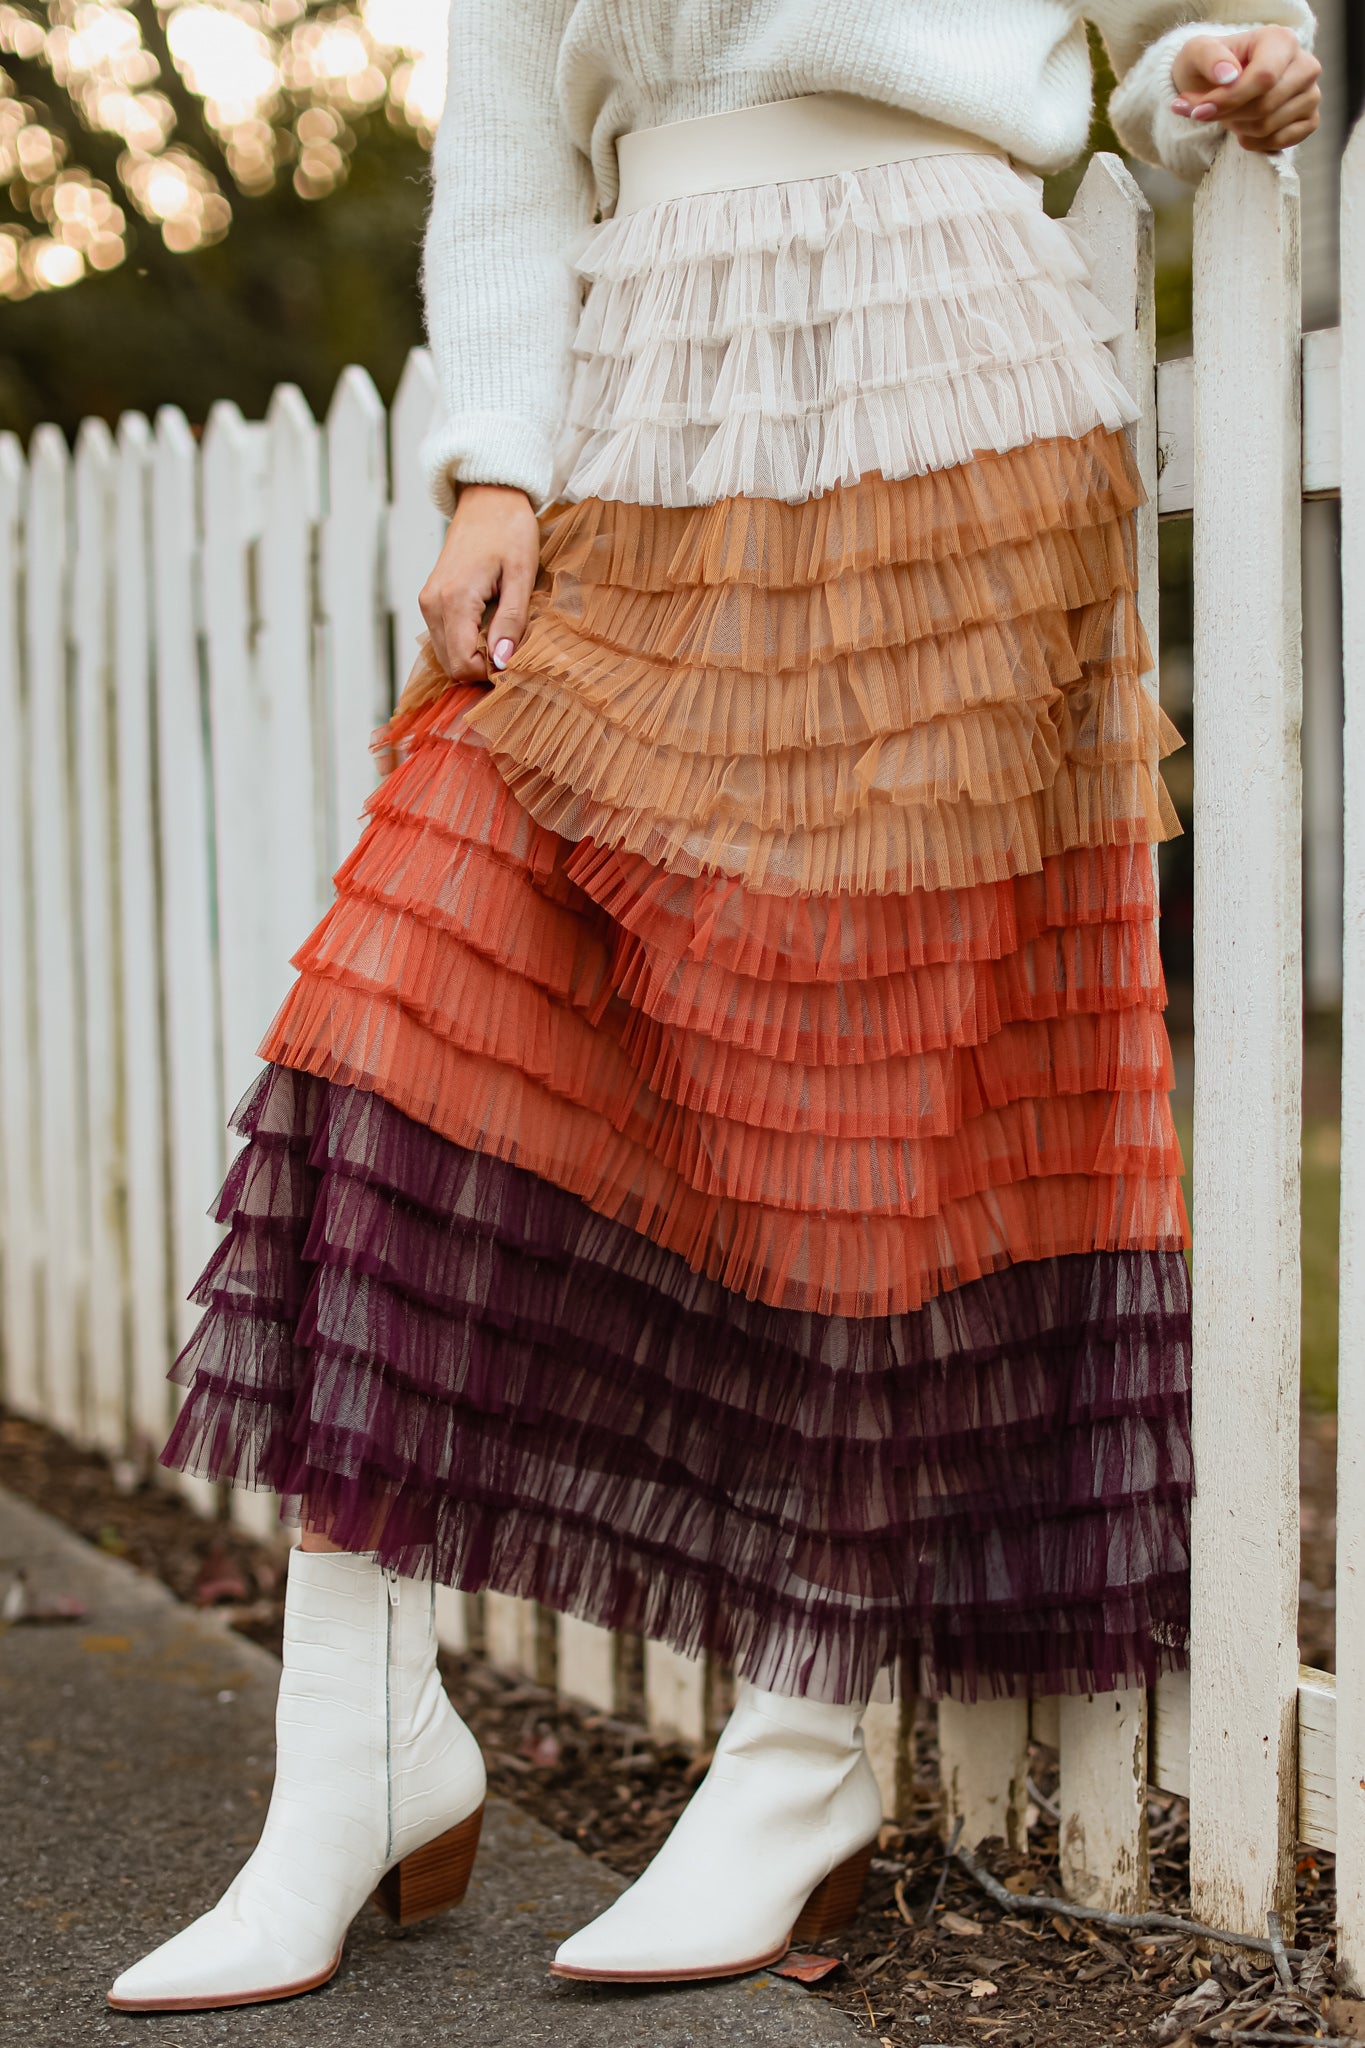 Front view of this skirt that features a high waist design, an elastic waistband and ruffle tulle detailing throughout.